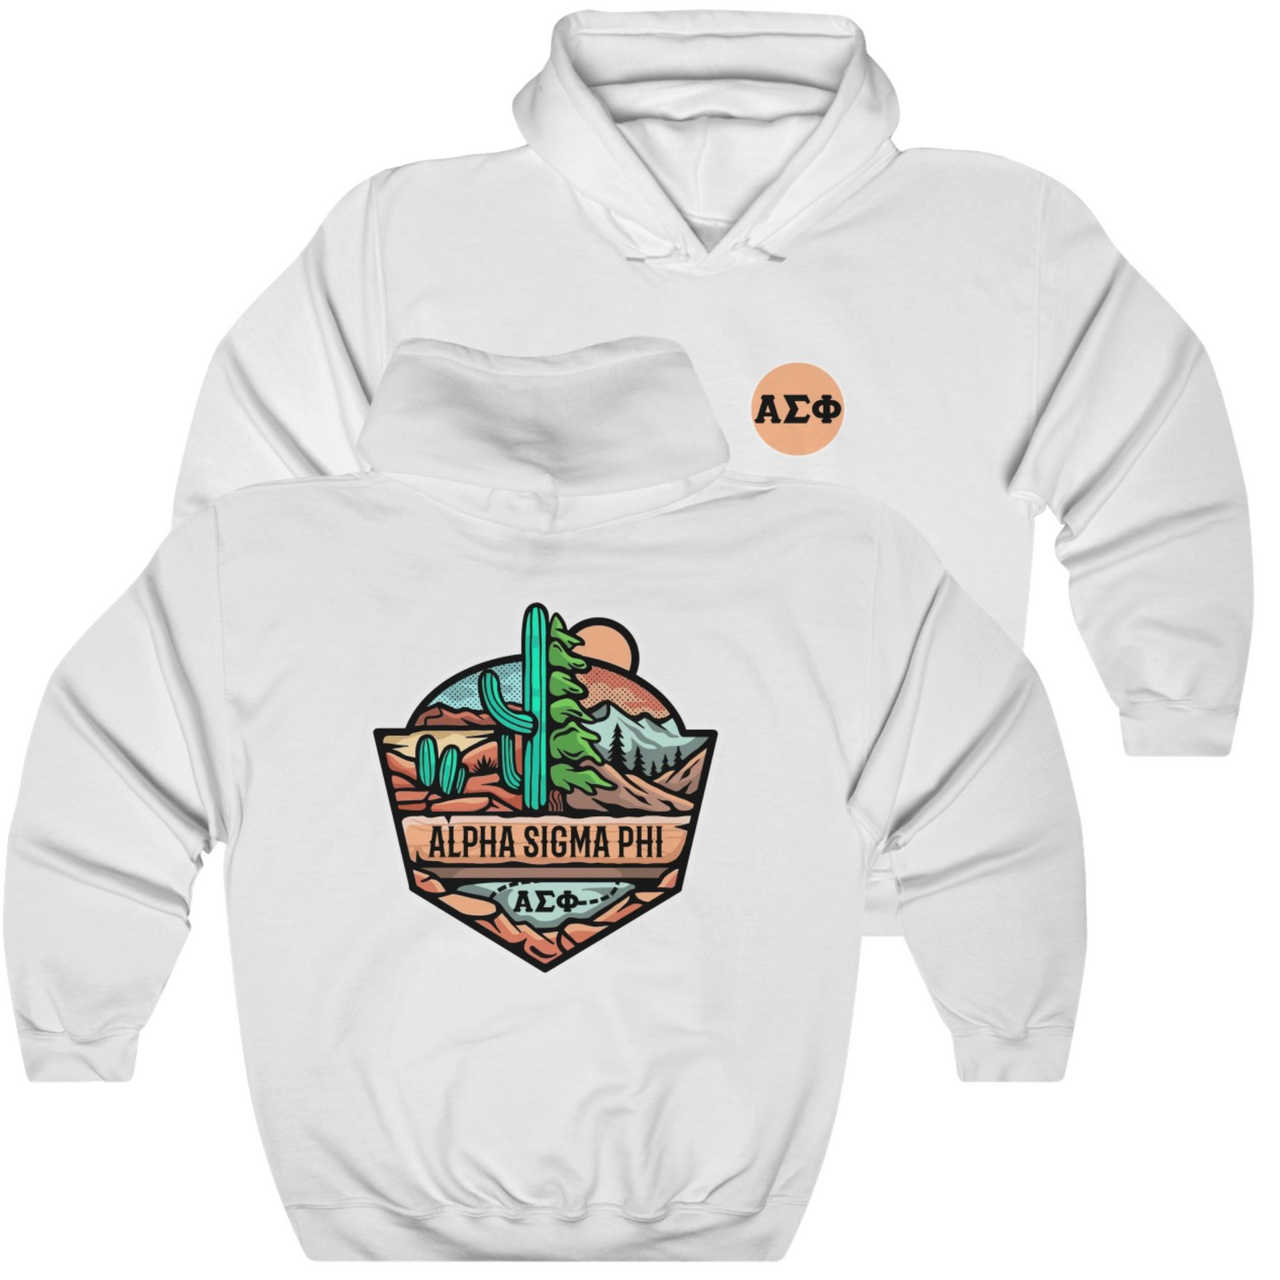 White Alpha Sigma Phi Graphic Hoodie | Desert Mountains | Alpha Sigma Phi Fraternity Shirt